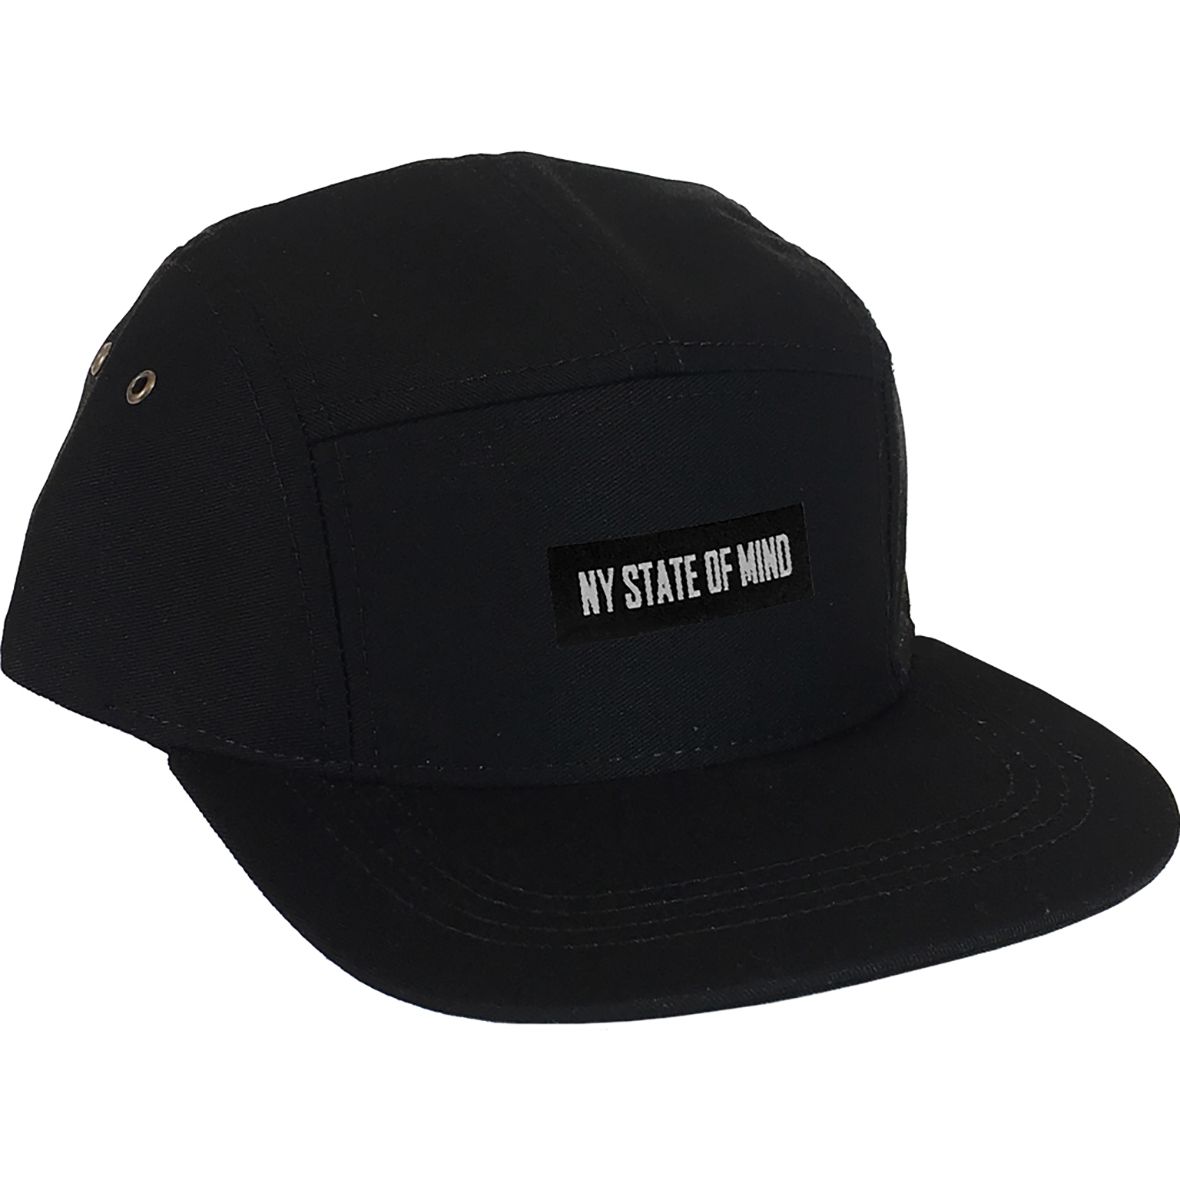 NY STATE OF MIND Canvas 5 Panel Hat 5P-00001 - Karmaloop